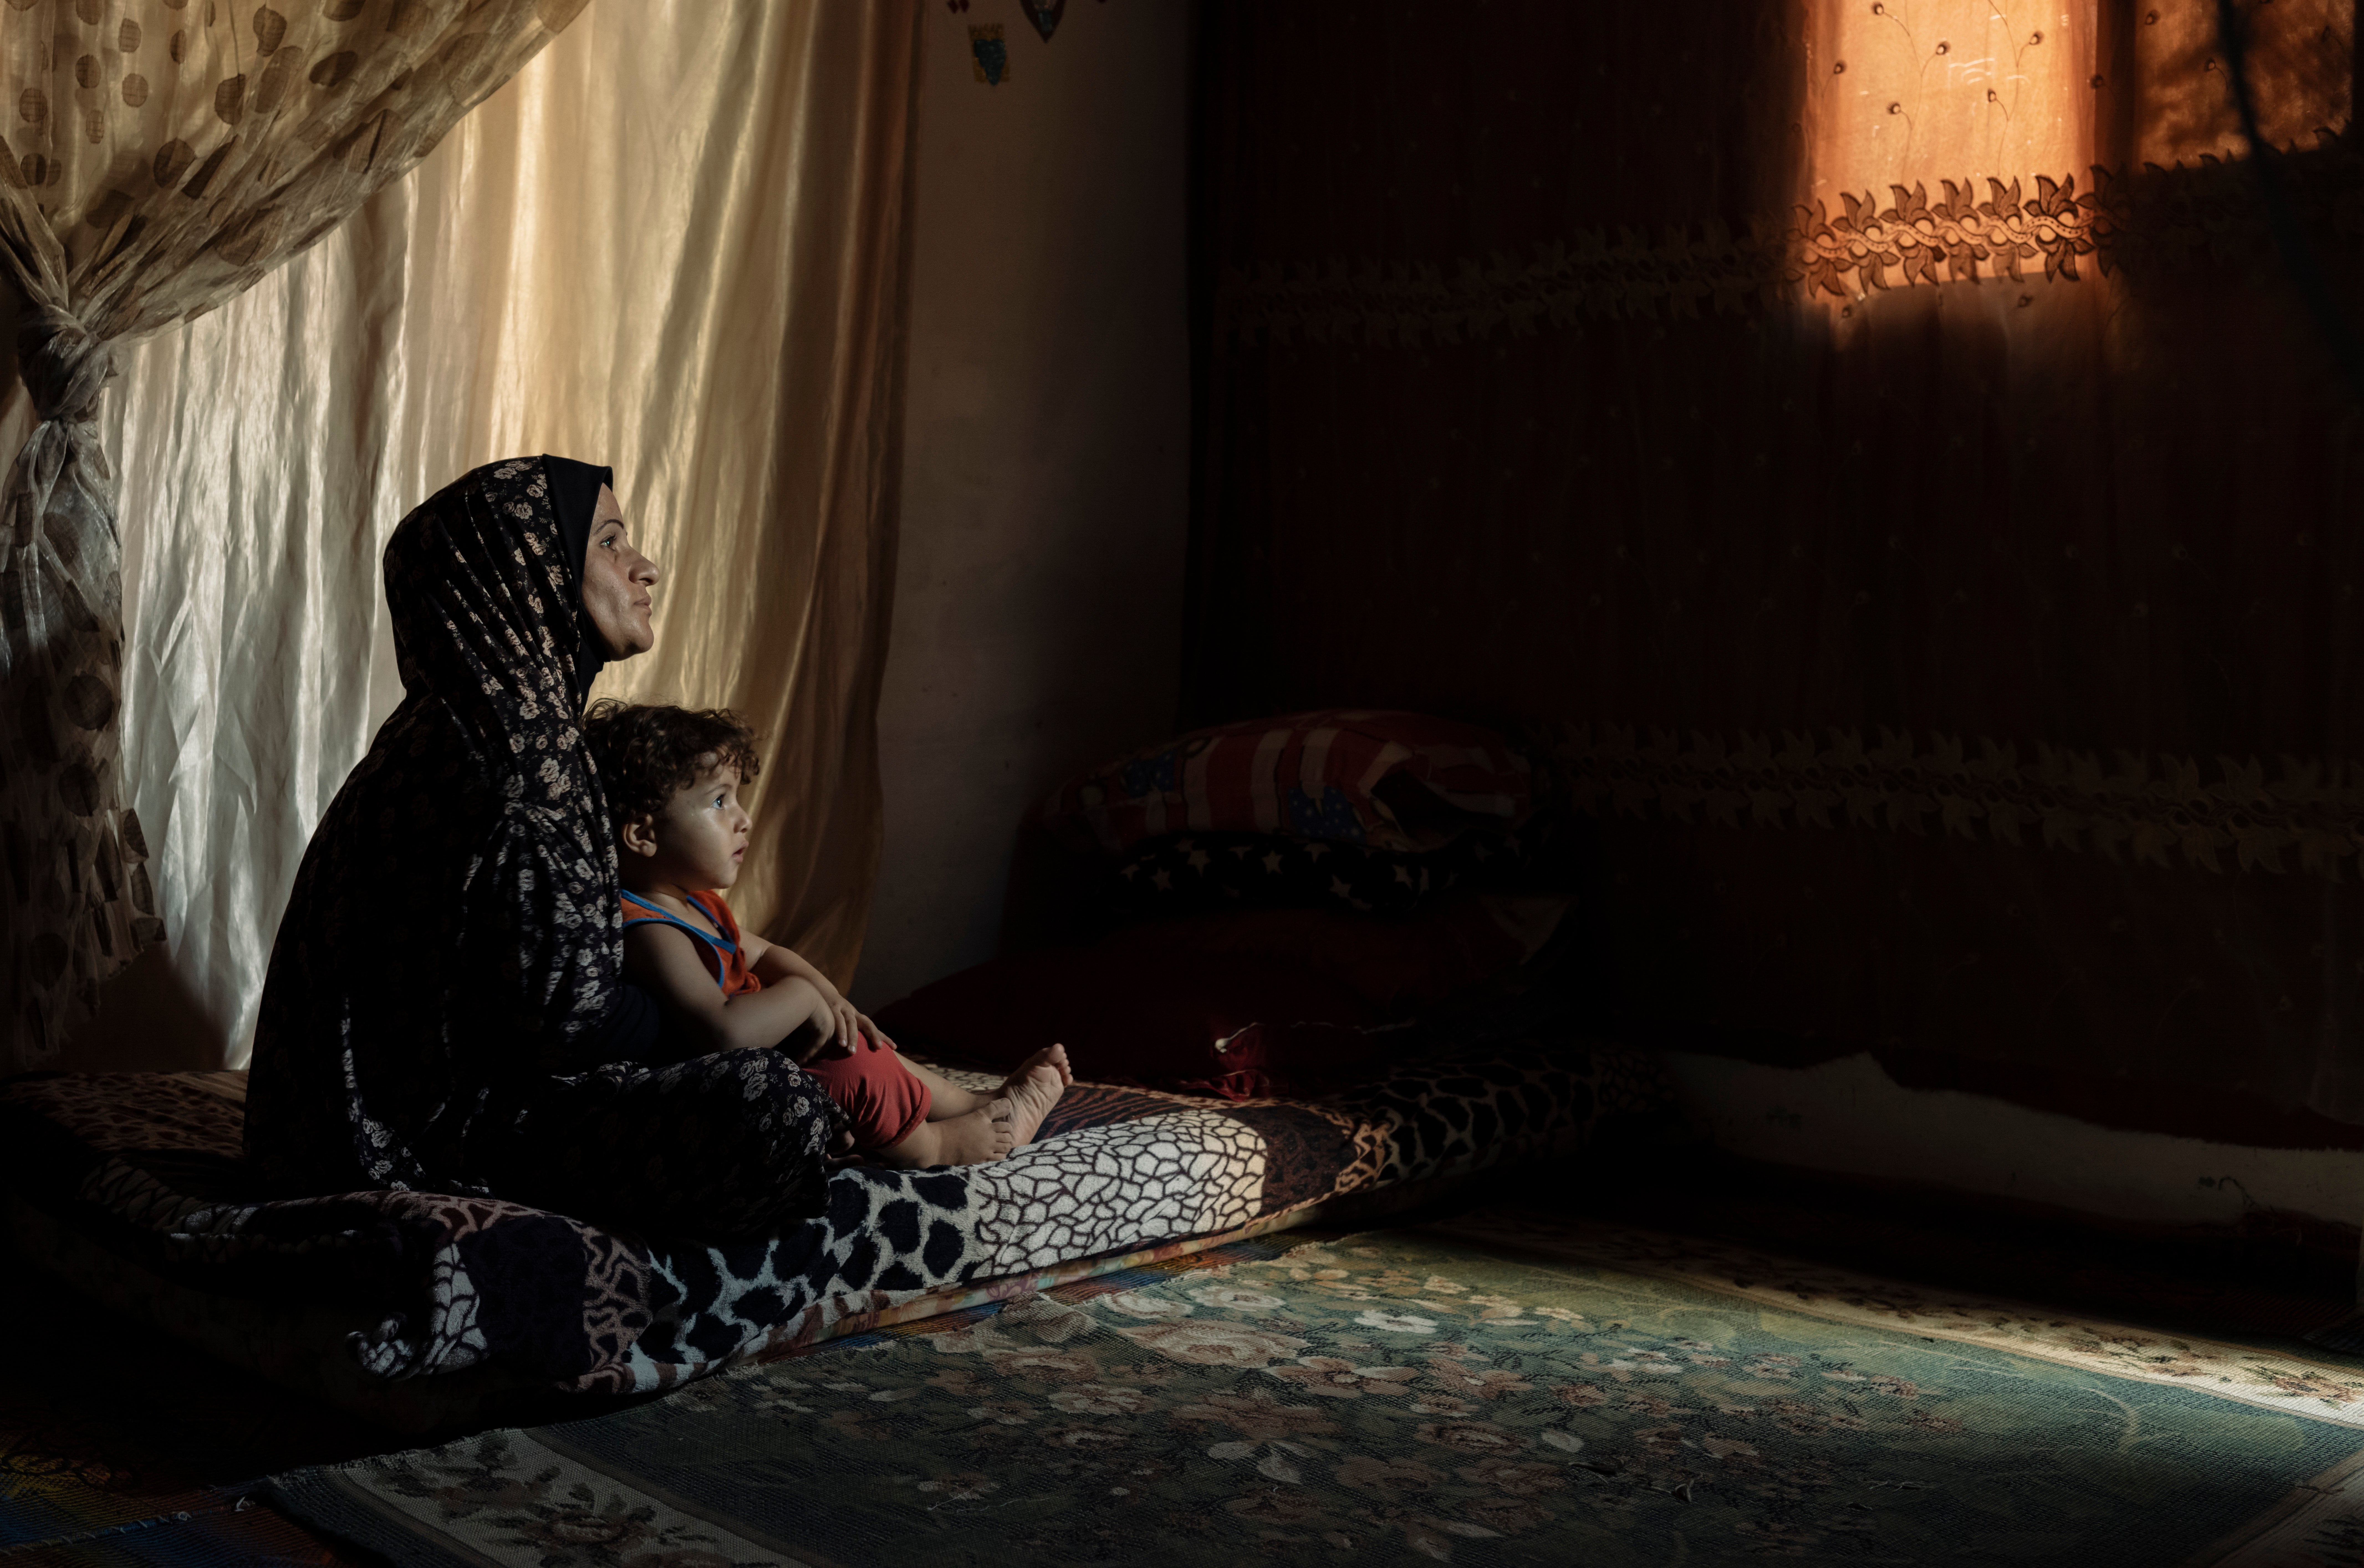 Enas lives with her husband and their eight children in a settlement near Beit Hanoun